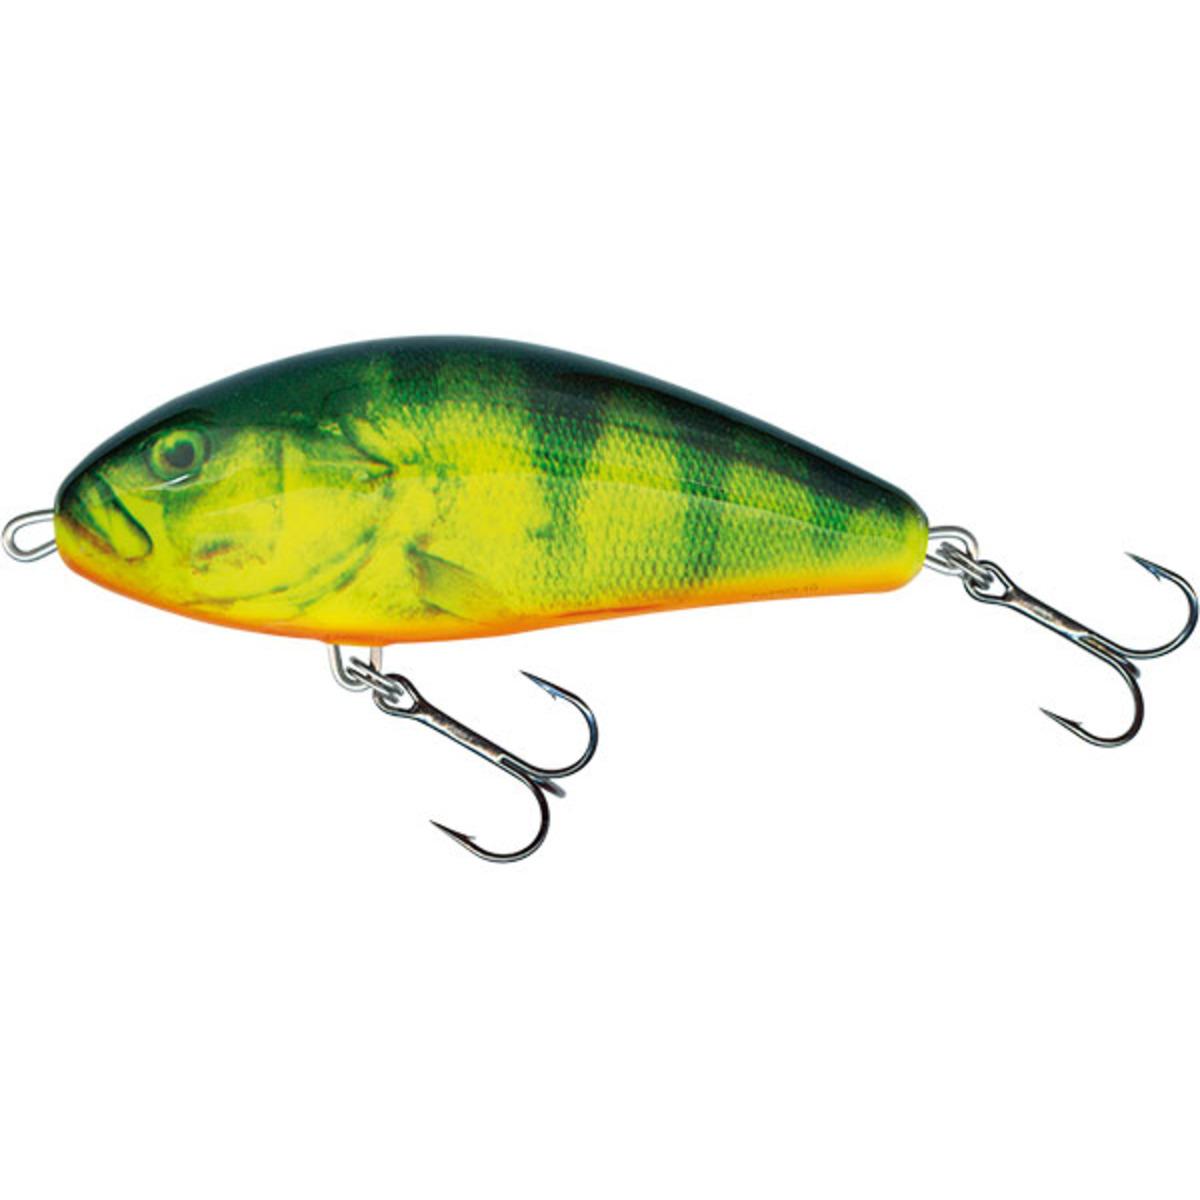 Salmo Fatso Sinking - 10 Cm - Real Hot Perch